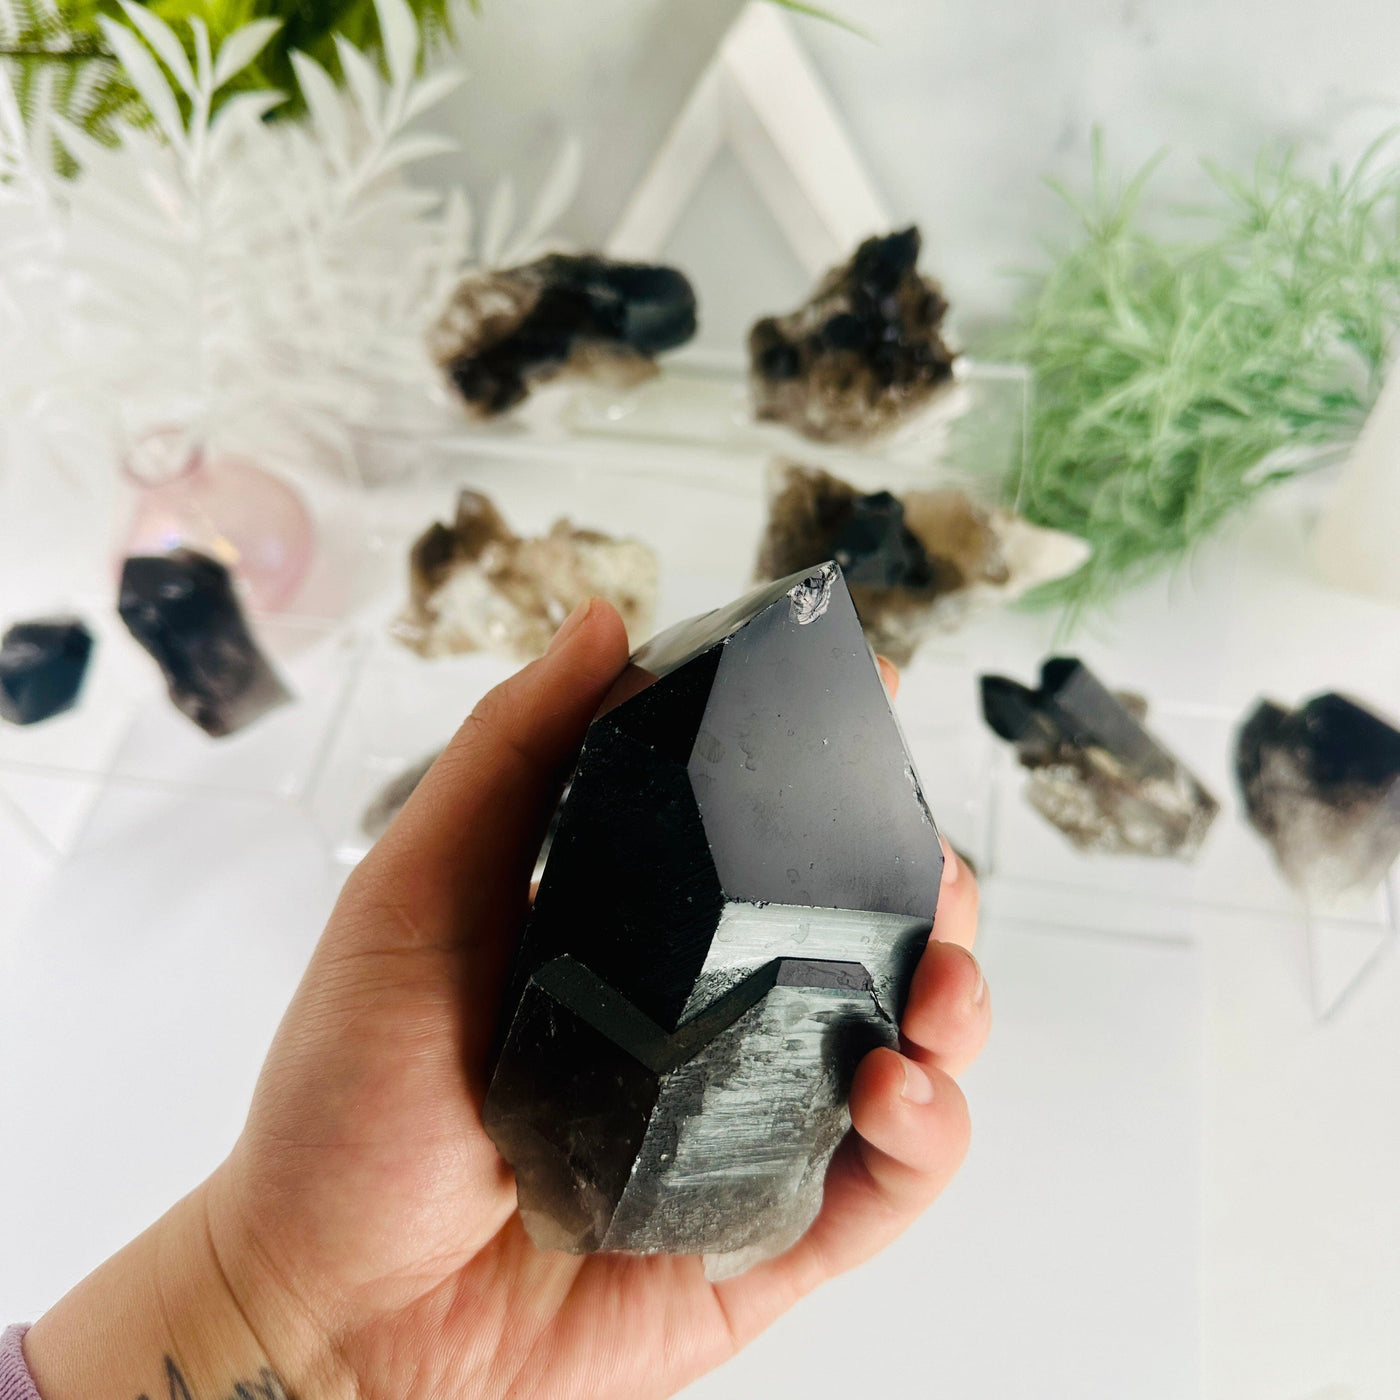 Smoky Quartz Cluster - Natural Raw Crystals - YOU CHOOSE variant 12 in hand for size reference with other variants in background